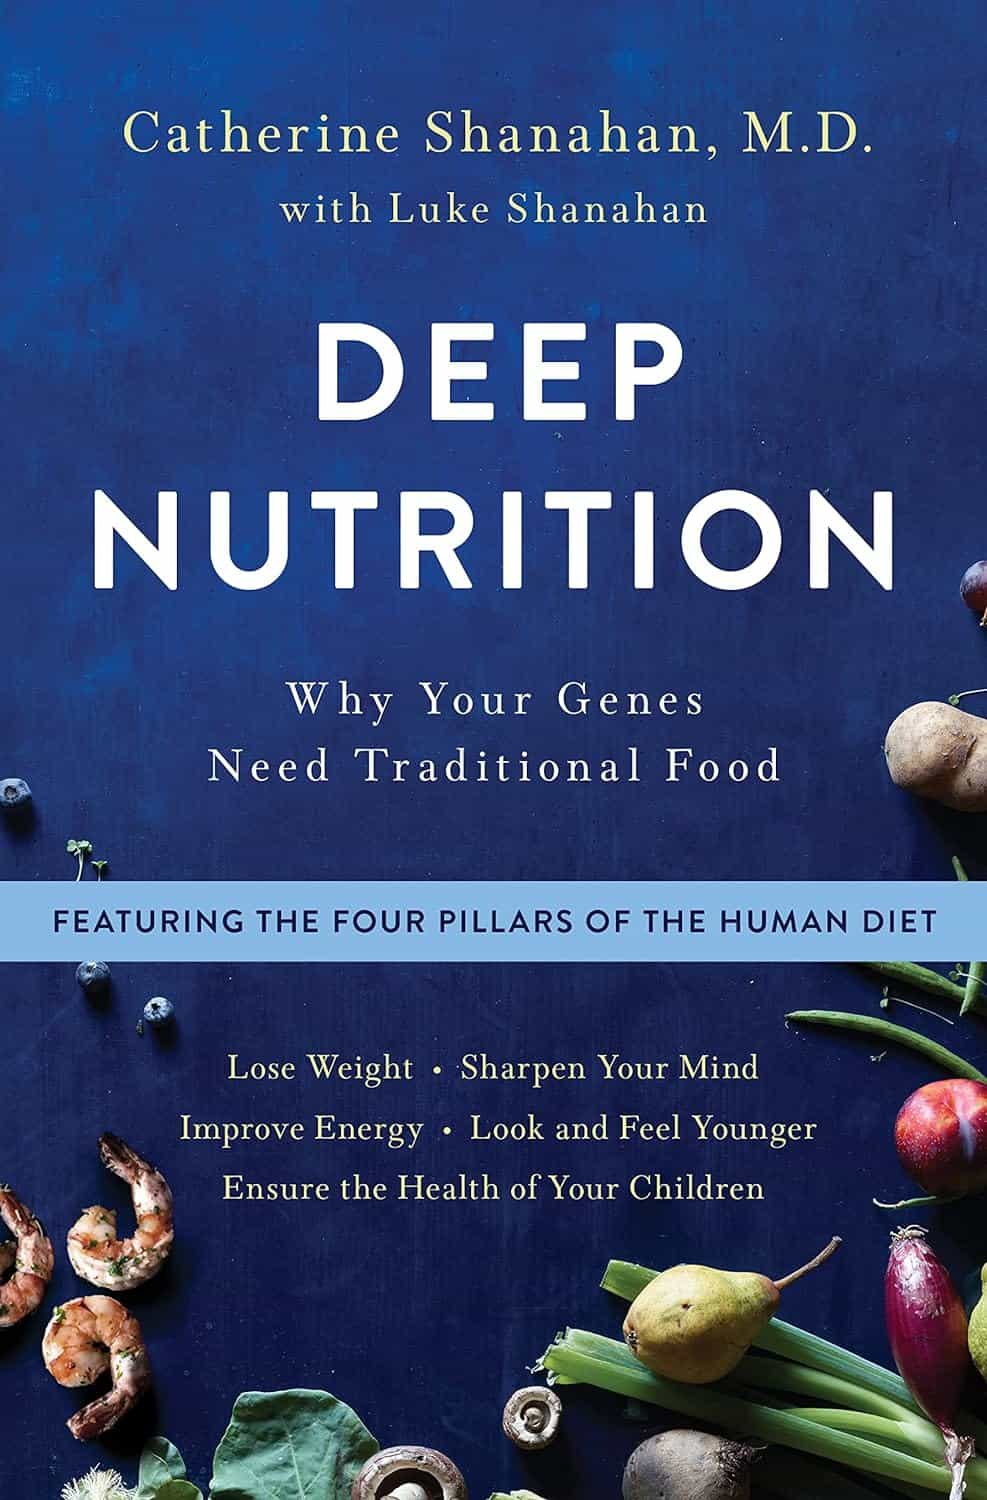 Deep Nutrition Why Your Genes Need Traditional Food – Catherine Shanahan, M.D.